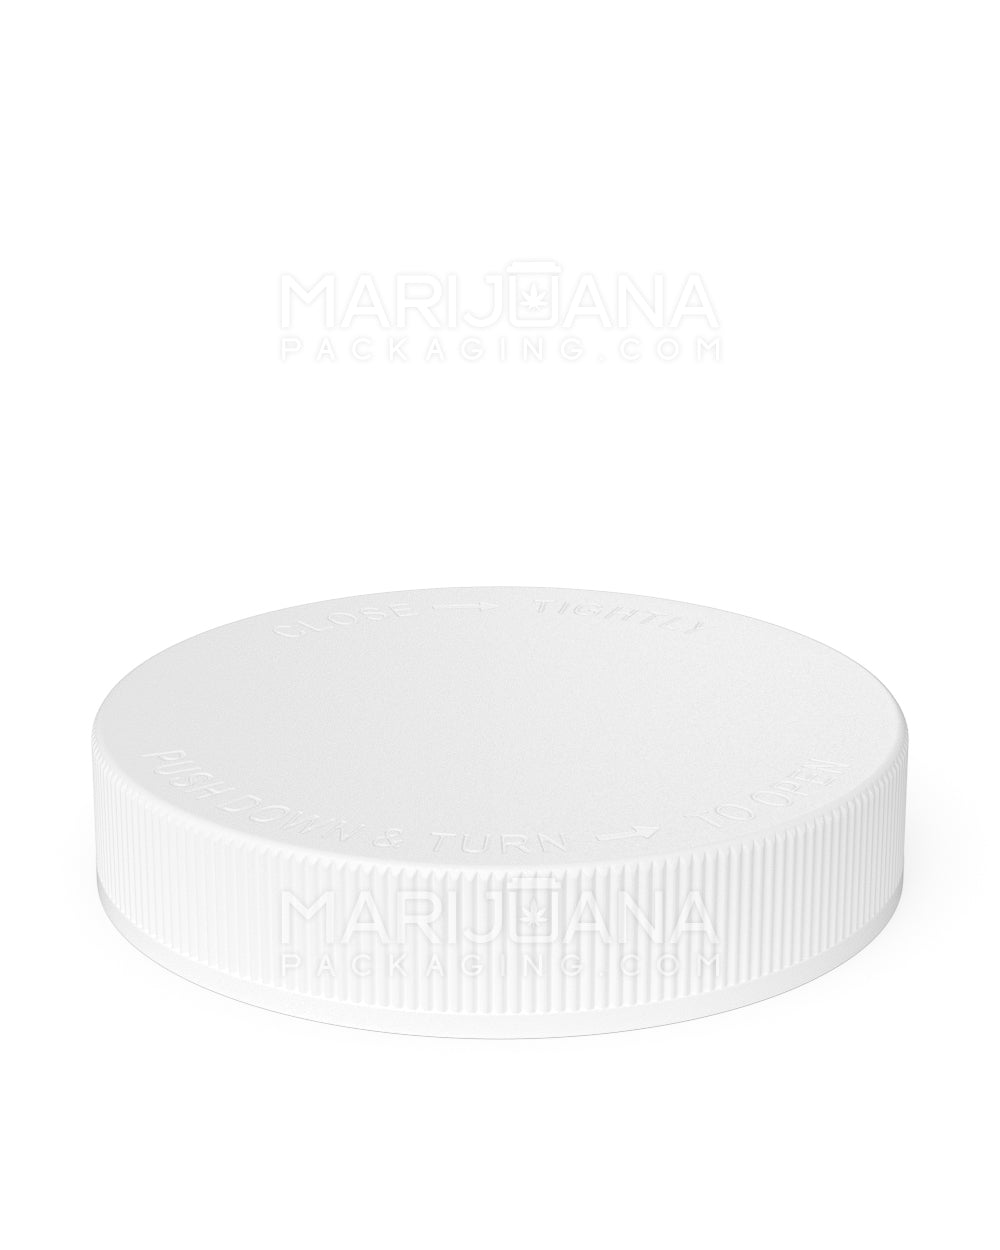 Child Resistant | Ribbed Push Down & Turn Plastic Caps w/ Foam Liner | 89mm - Semi Gloss White - 205 Count - 3